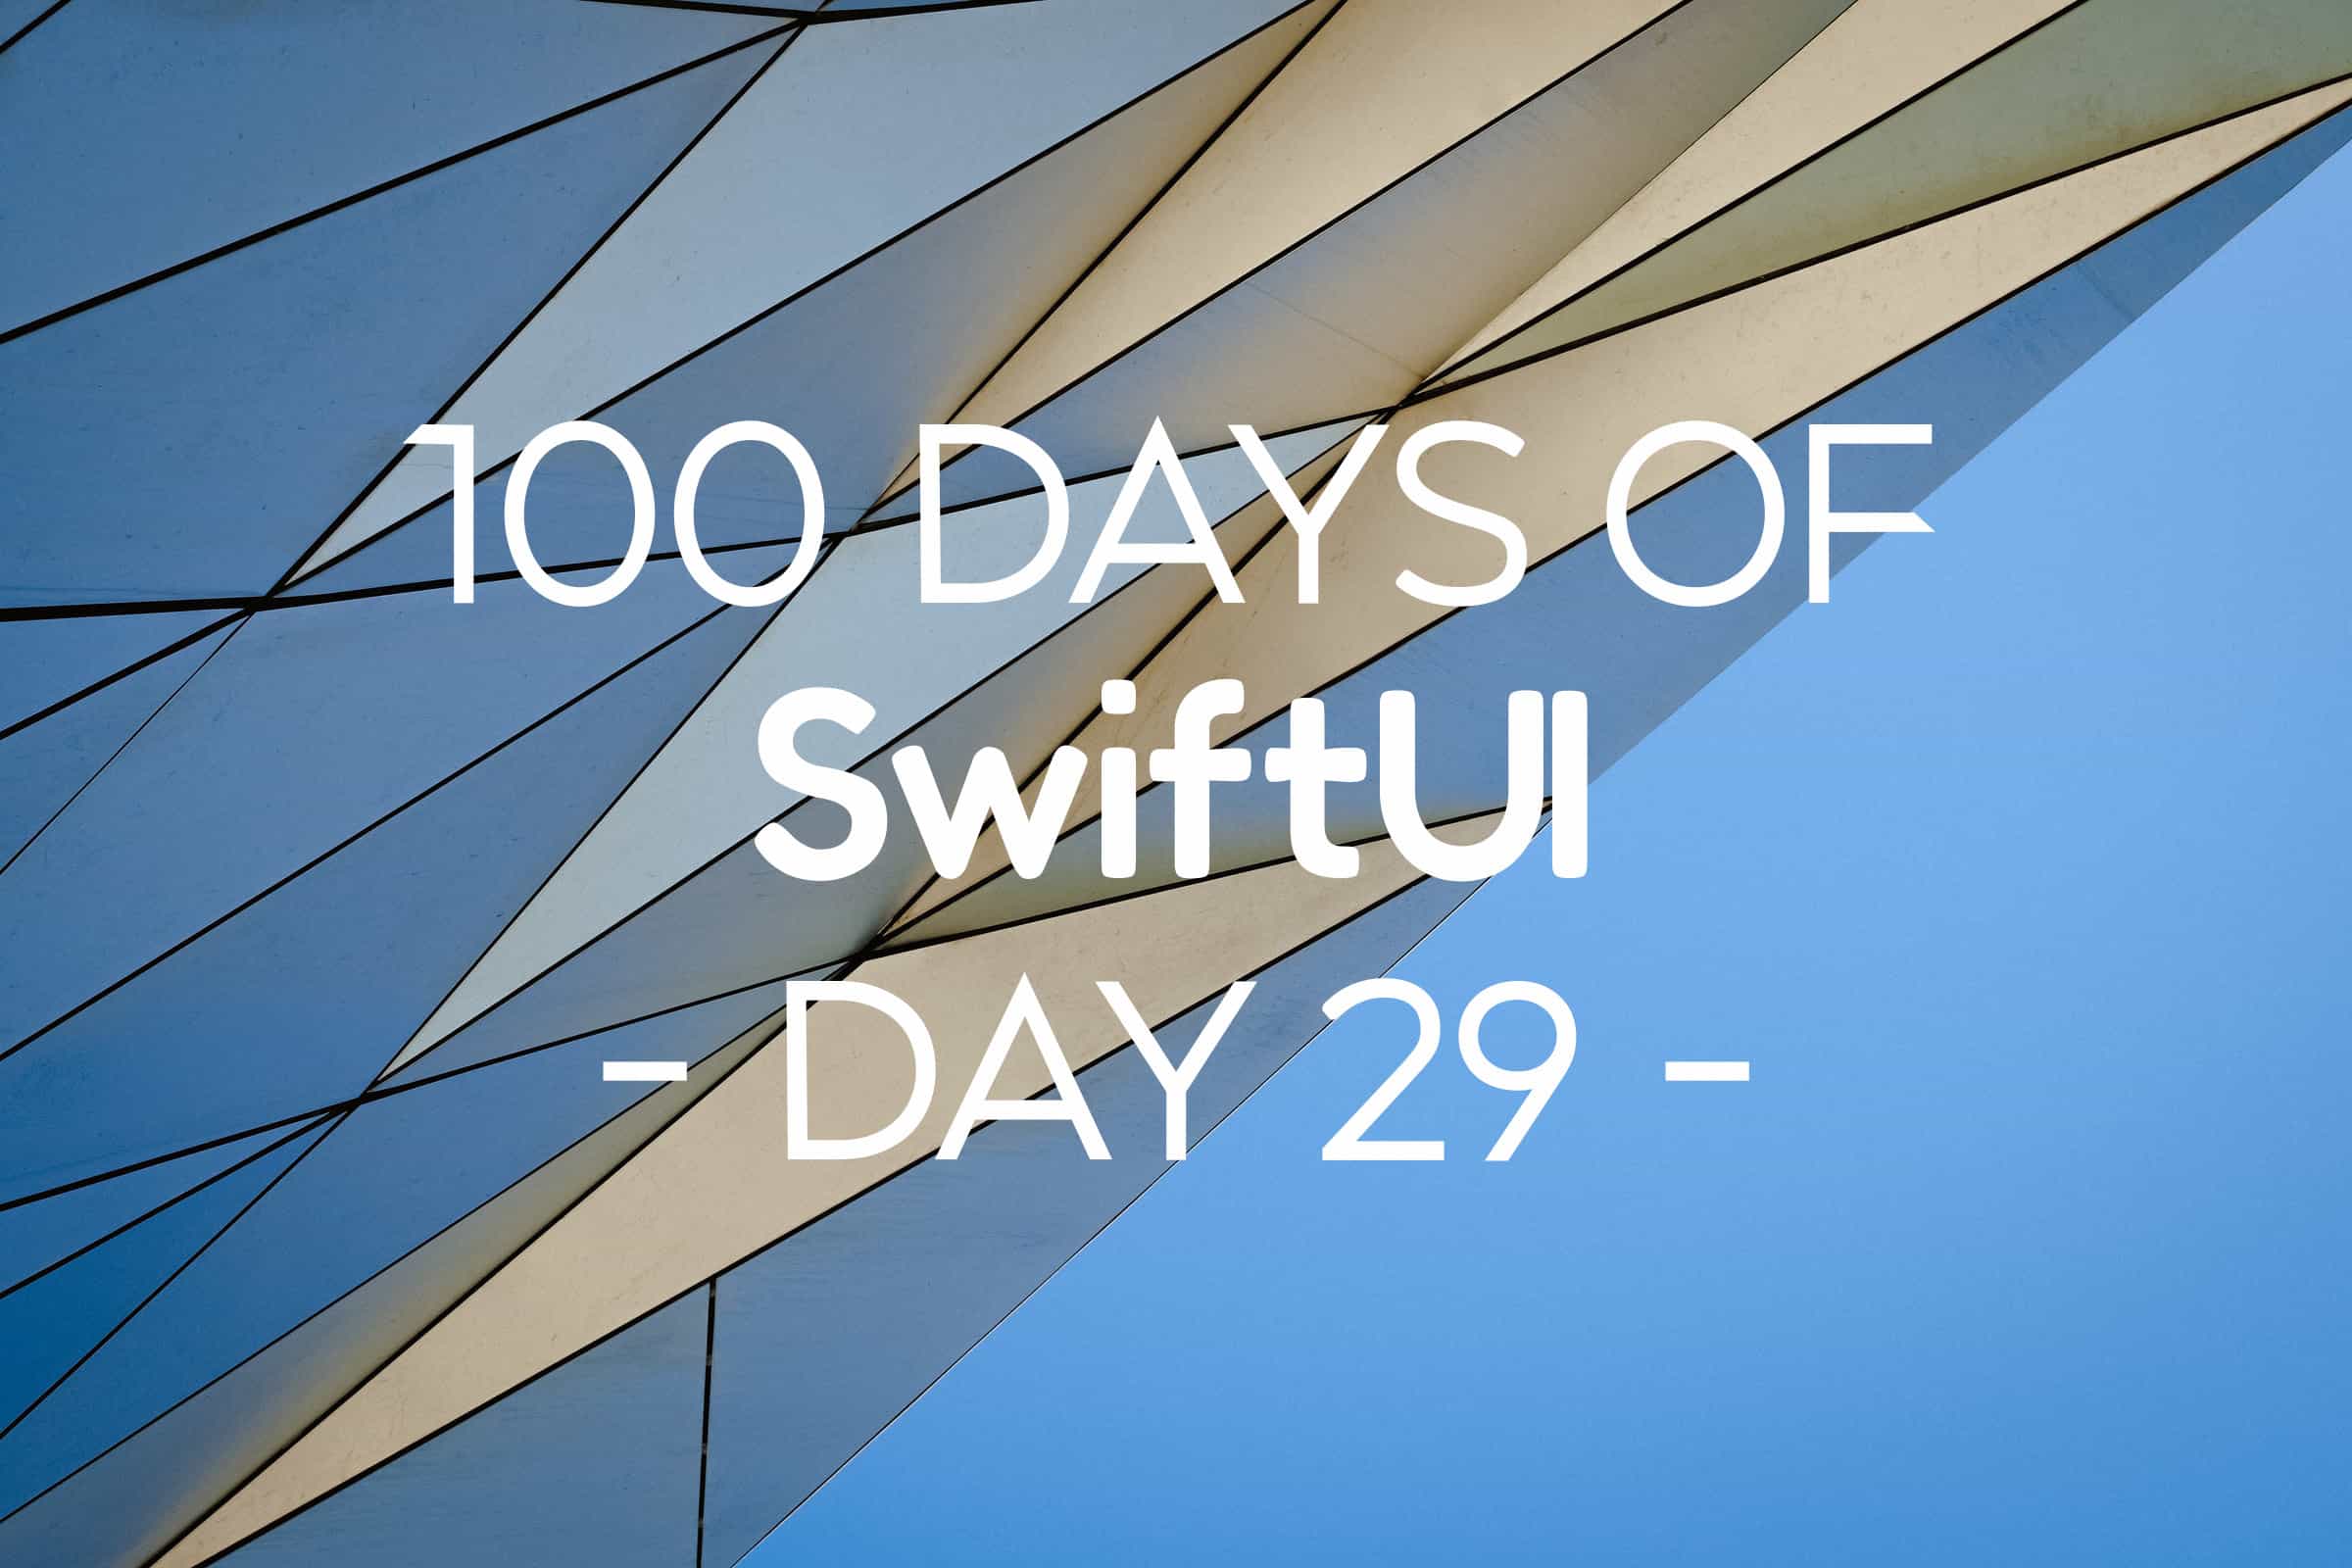 100 Days of SwiftUI Day 29